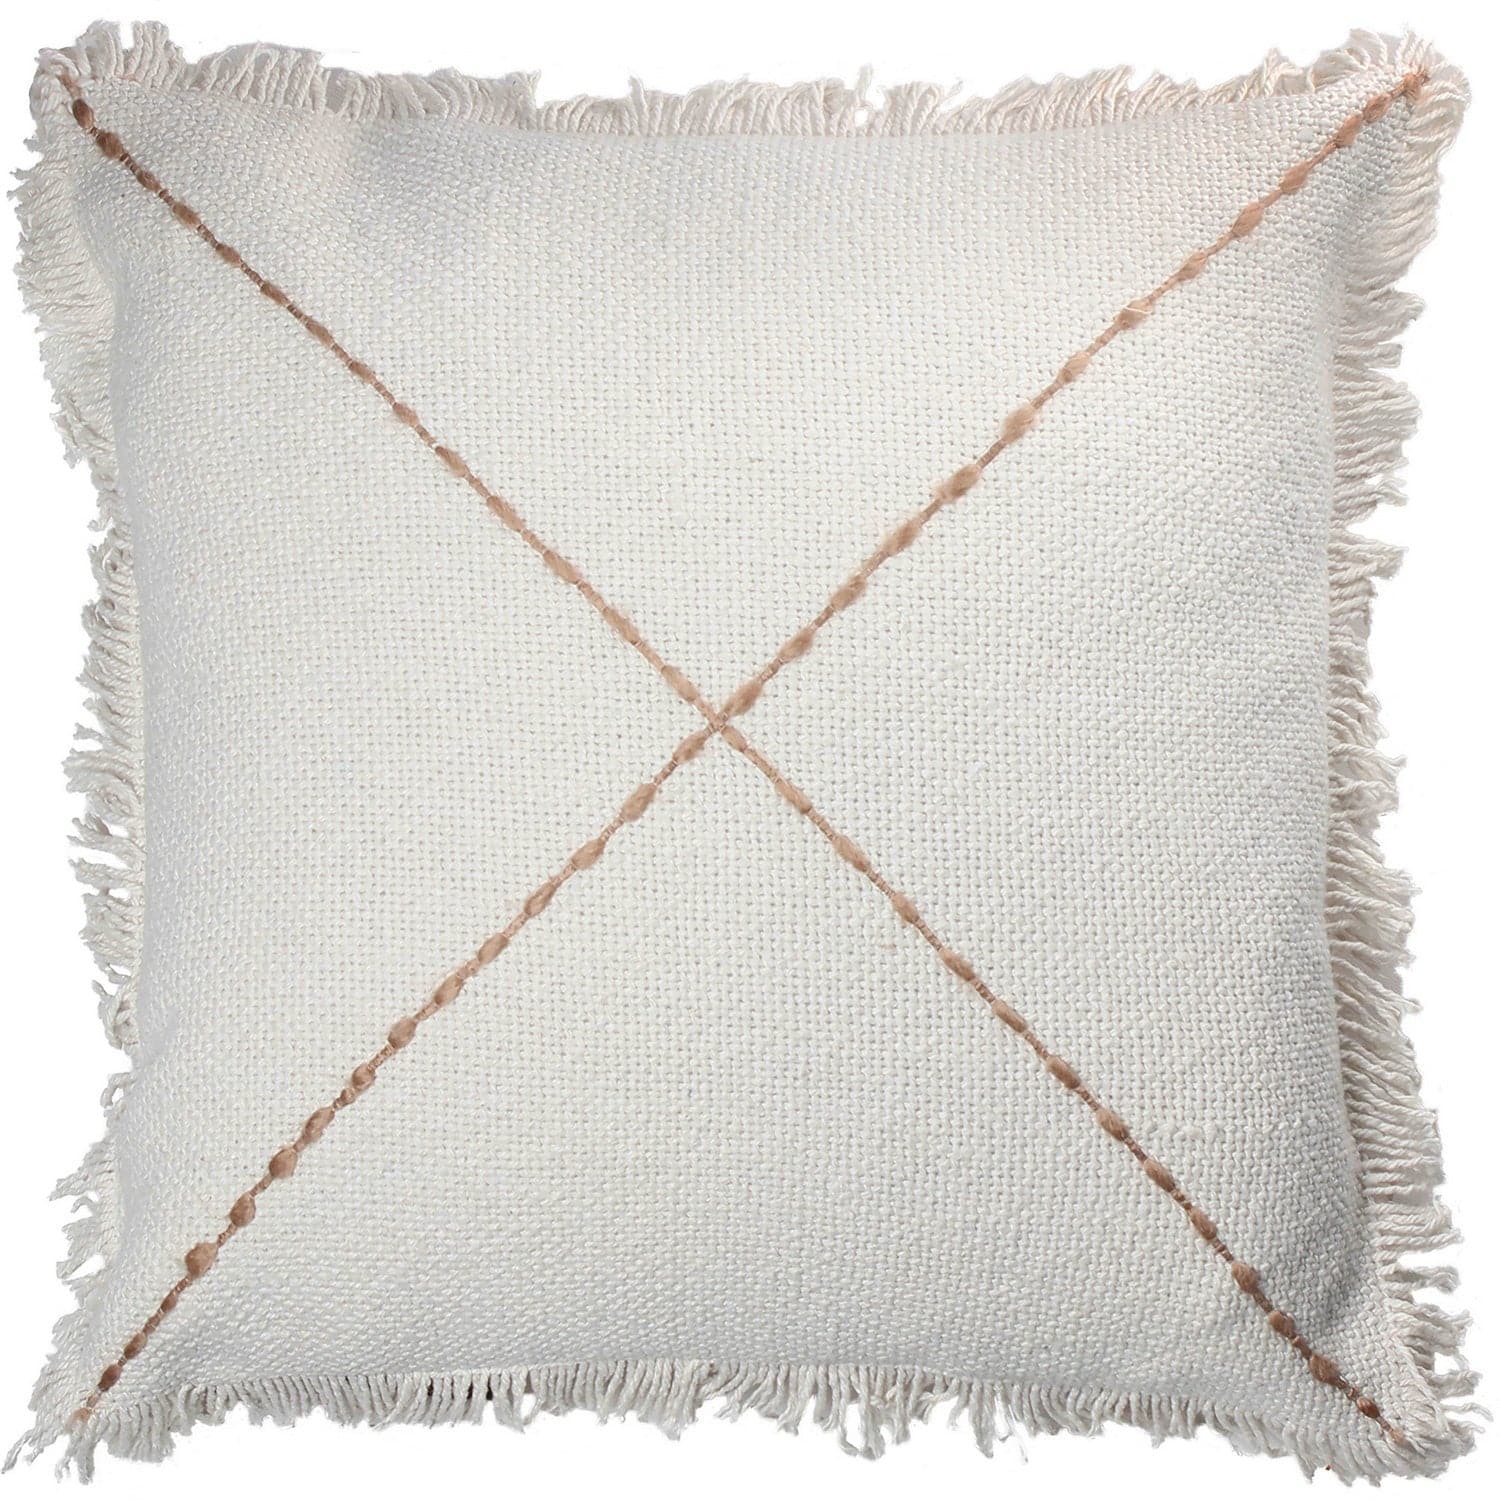 Renwil - PWFL1200 - Home Accents - Rugs/Pillows/Blankets